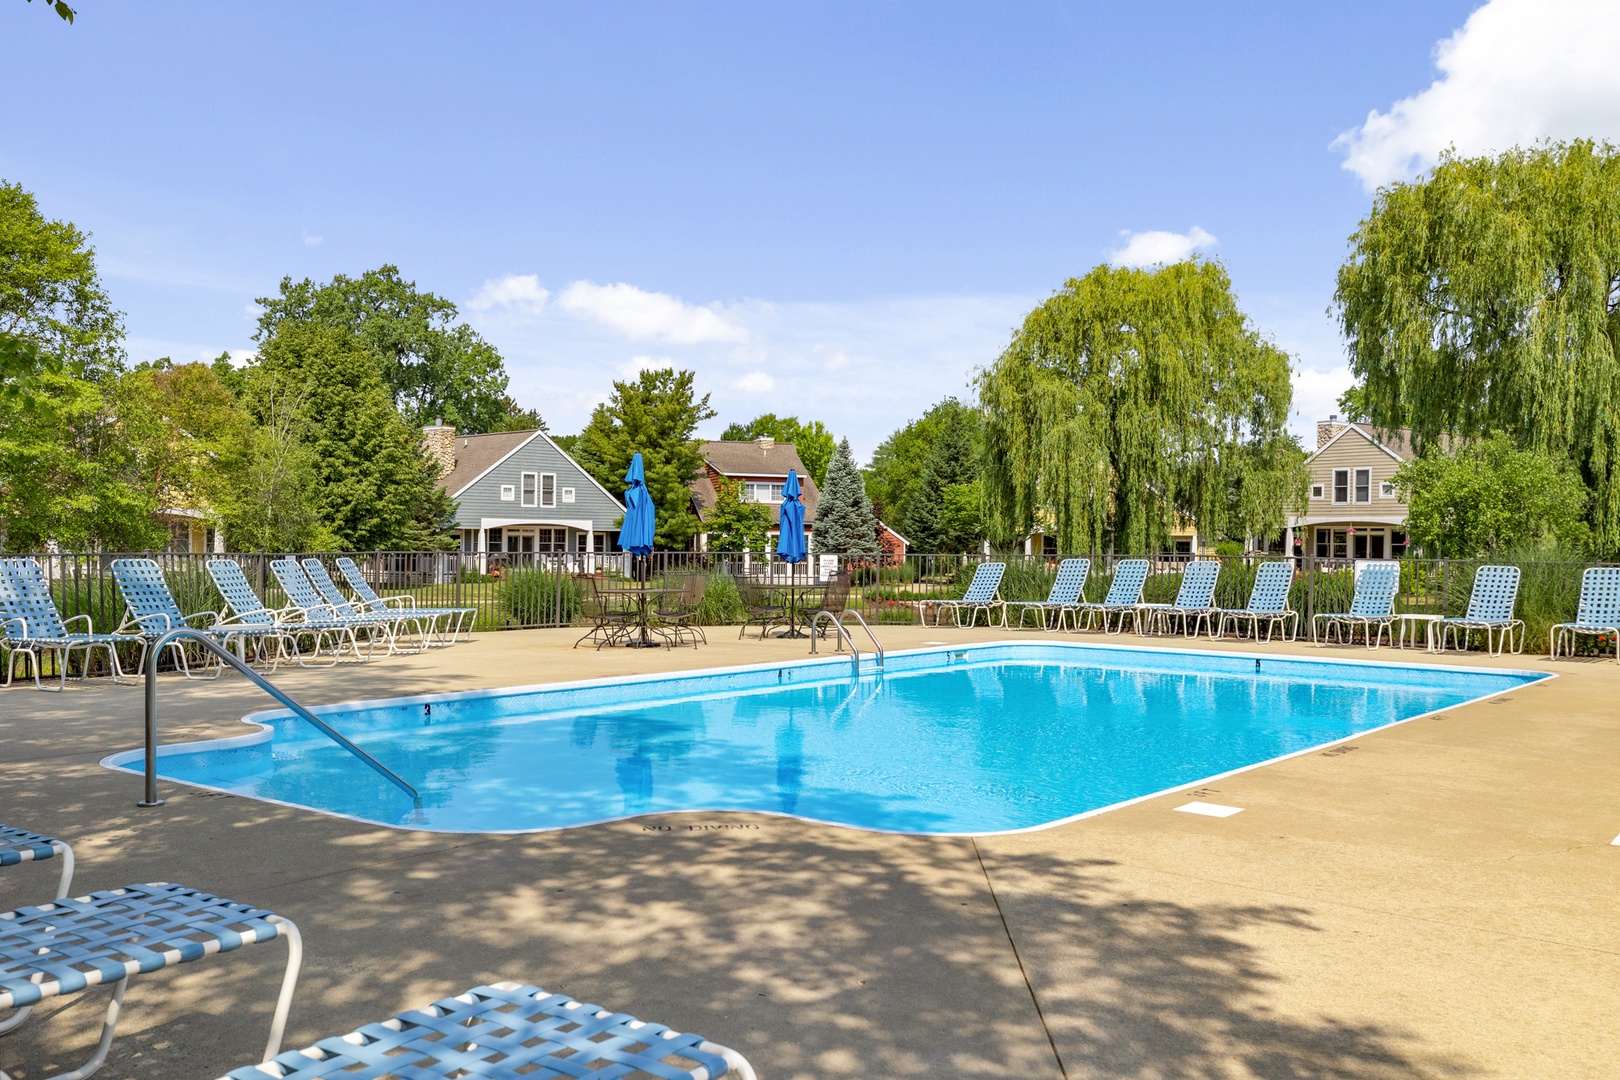 A community pool, chaise lounges and warm sun quickly get you in vacation mode!